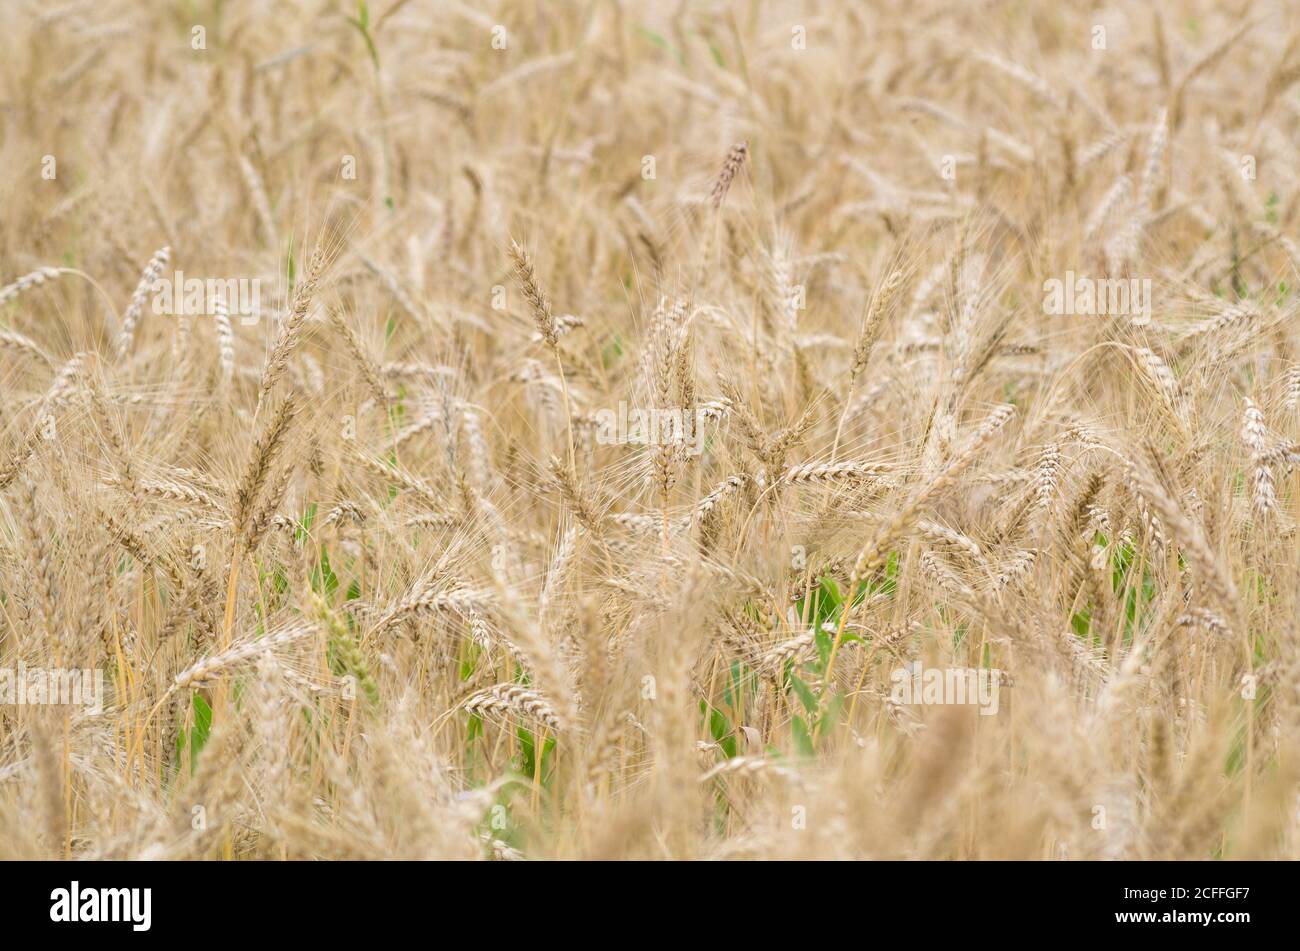 Ripe wheat crops in shallow focus. Seasonal agricultural background. Stock Photo